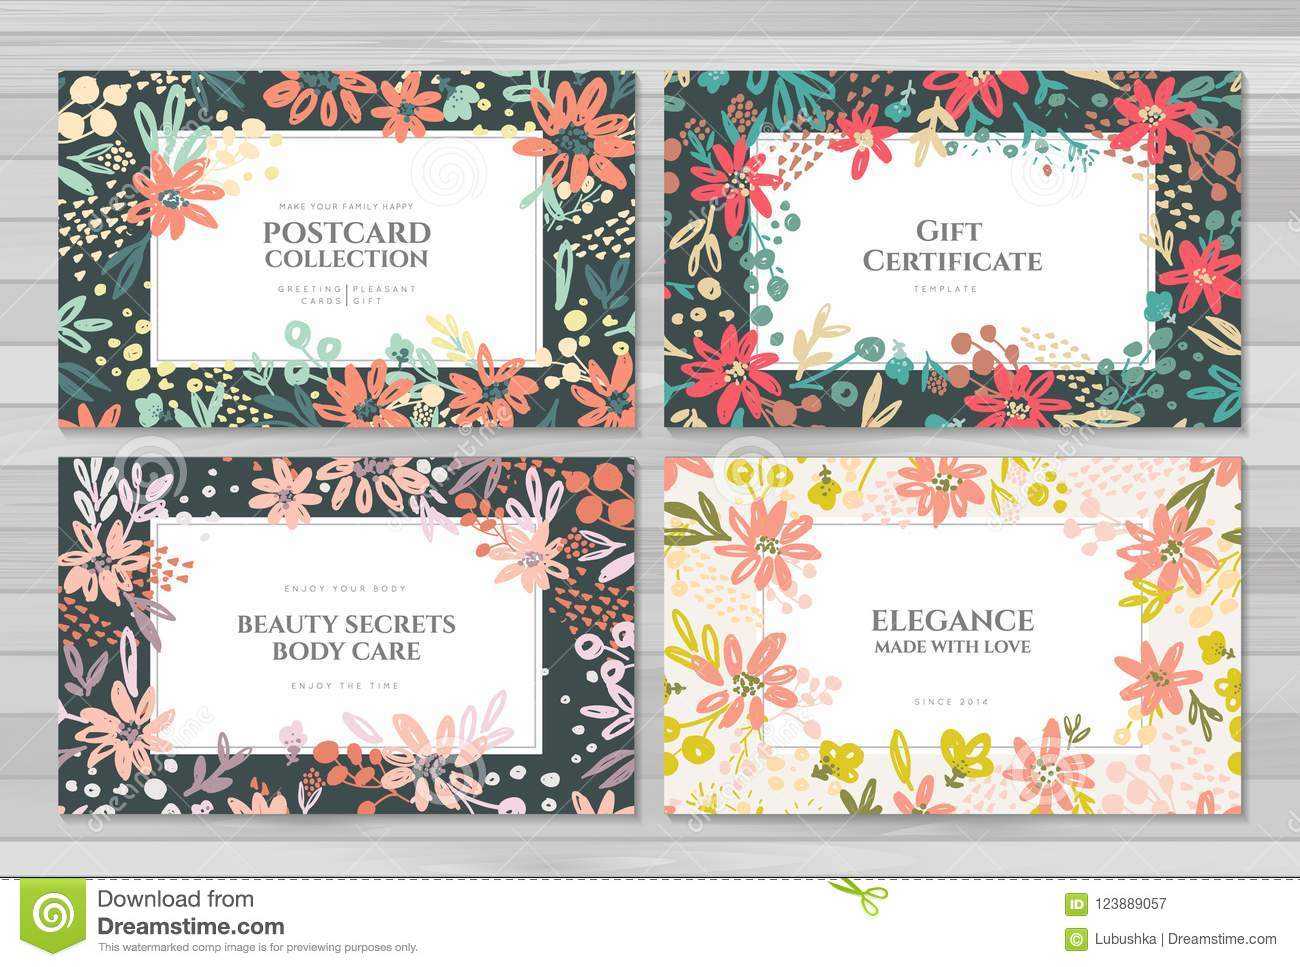 Background Cards Templates Stock Vector. Illustration Of With Advertising Cards Templates